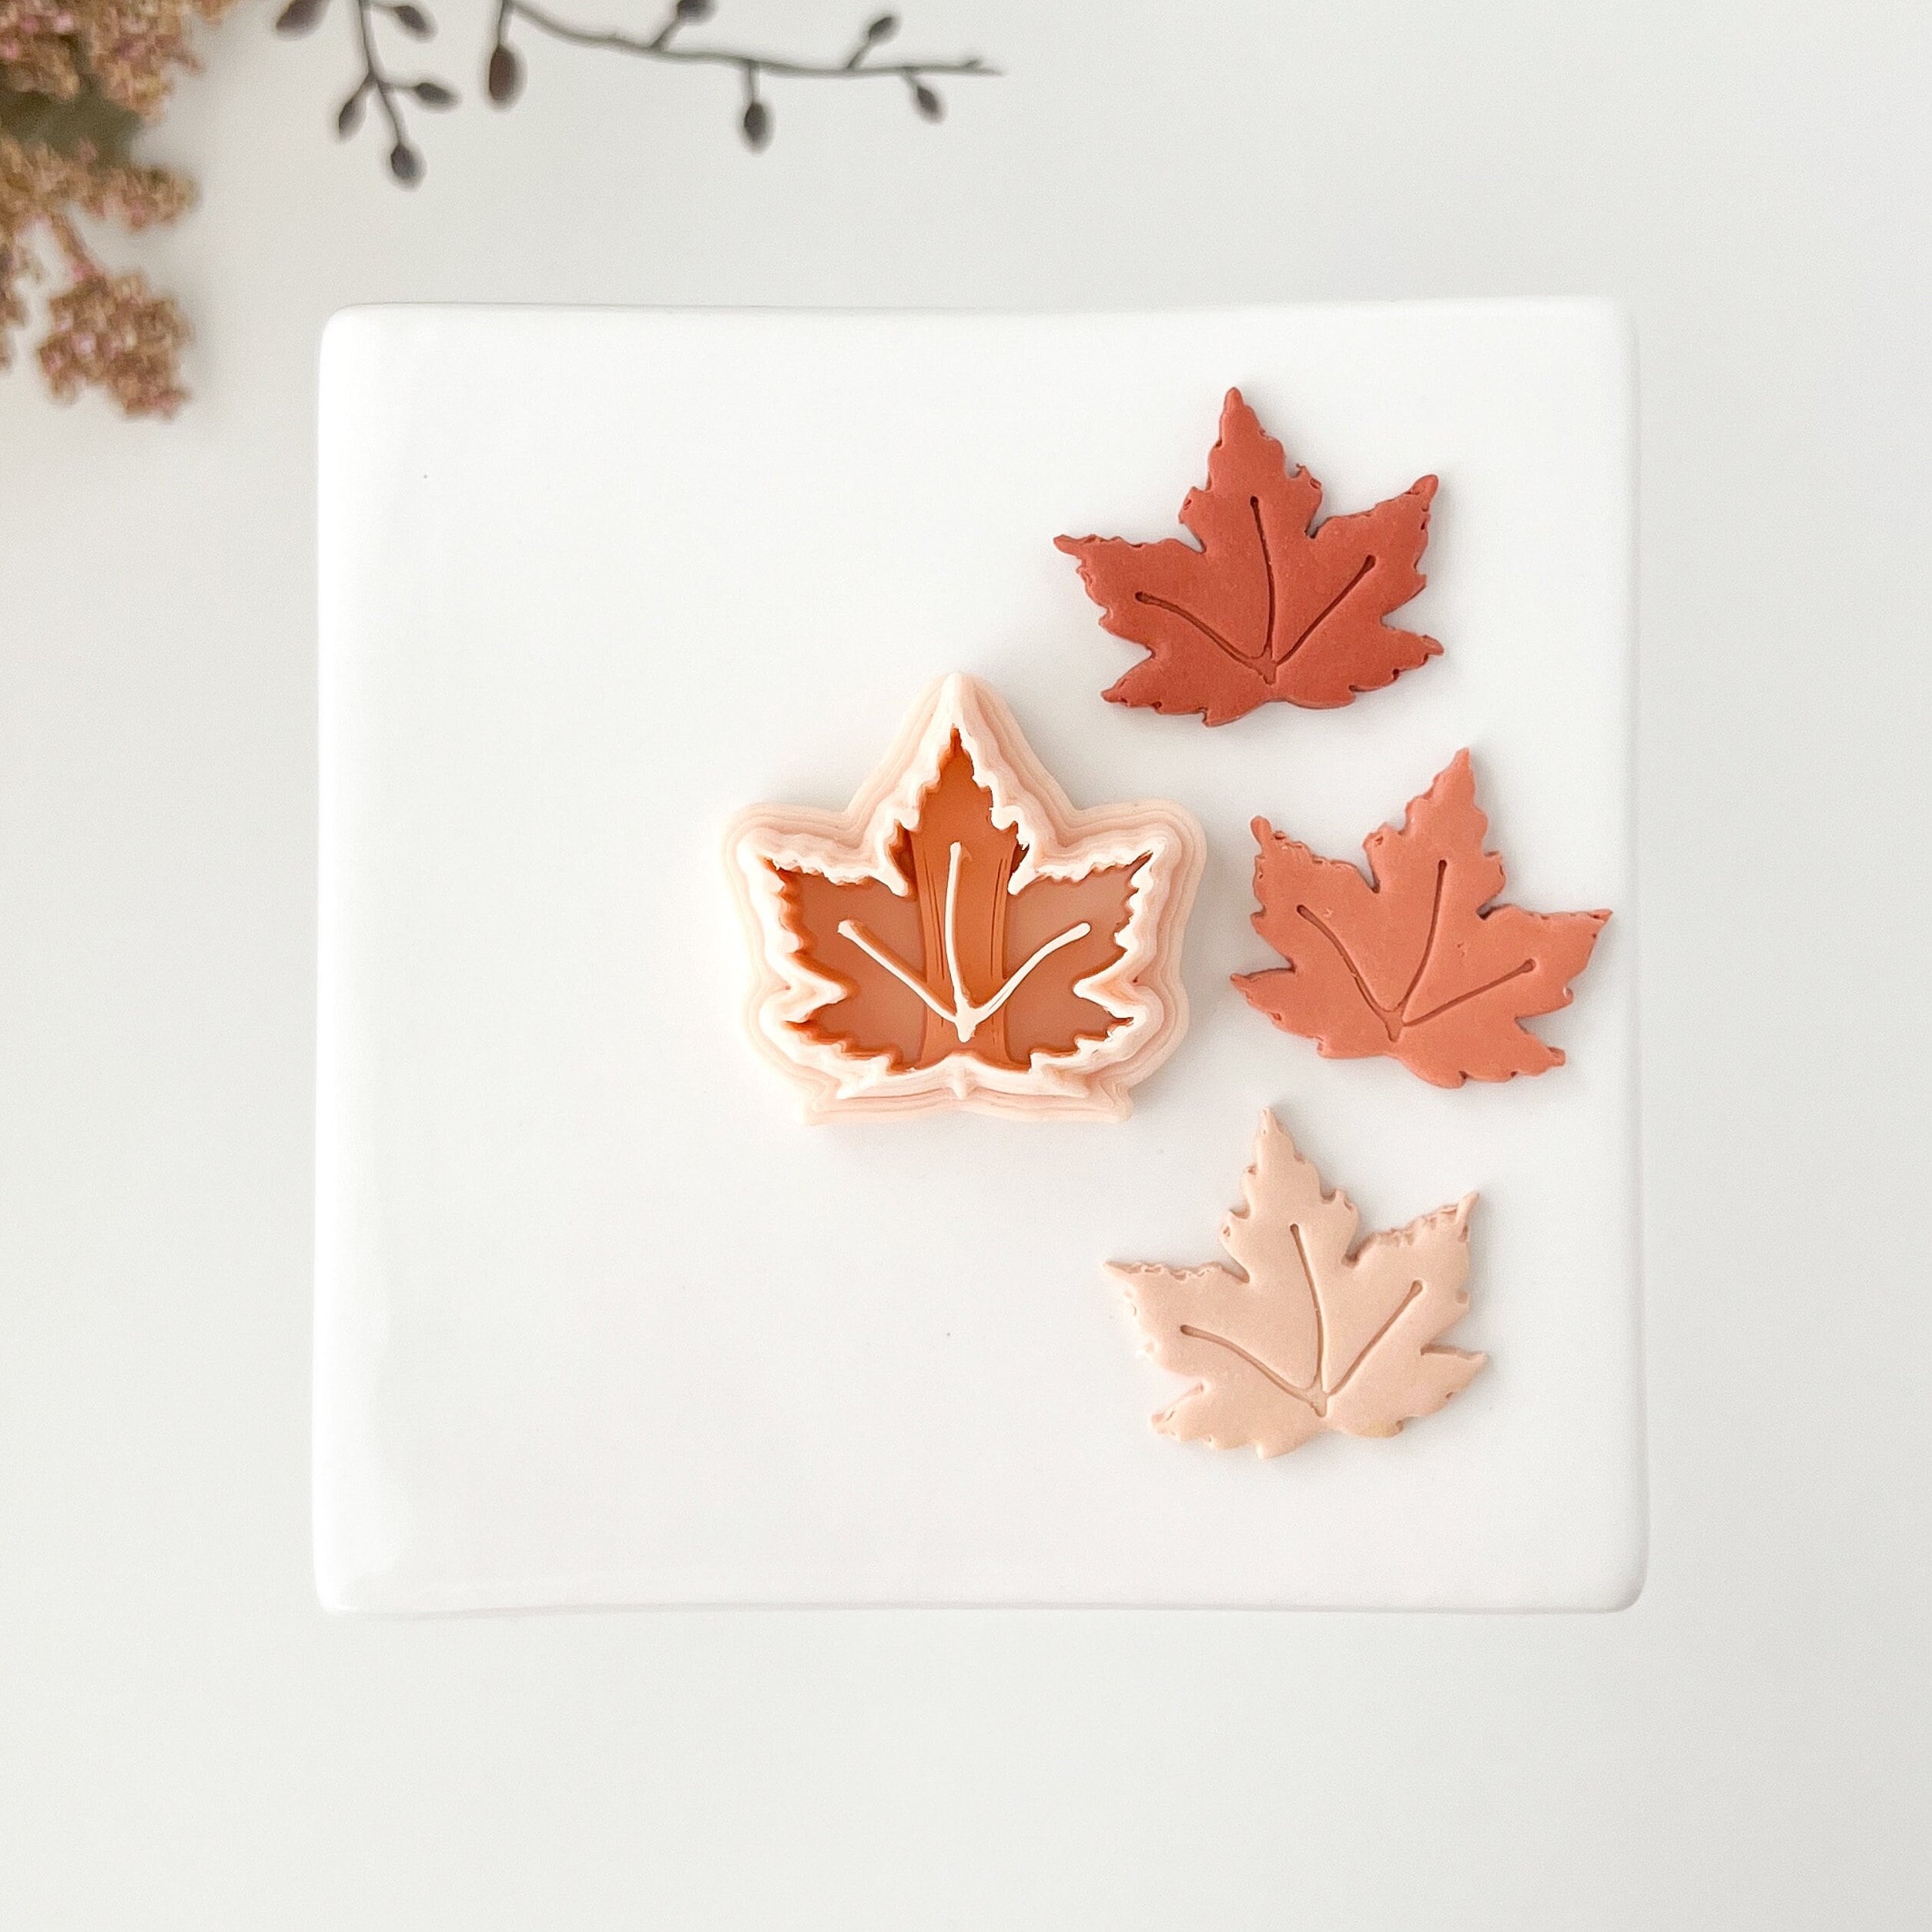  Keoker Mini Polymer Clay Cutters Halloween - Mini Fall Clay  Cutters for Earrings Making, Maple Leaf Autumn Clay Earrings Cutters, Clay  Cutters for Polymer Clay Jewelry : Arts, Crafts & Sewing